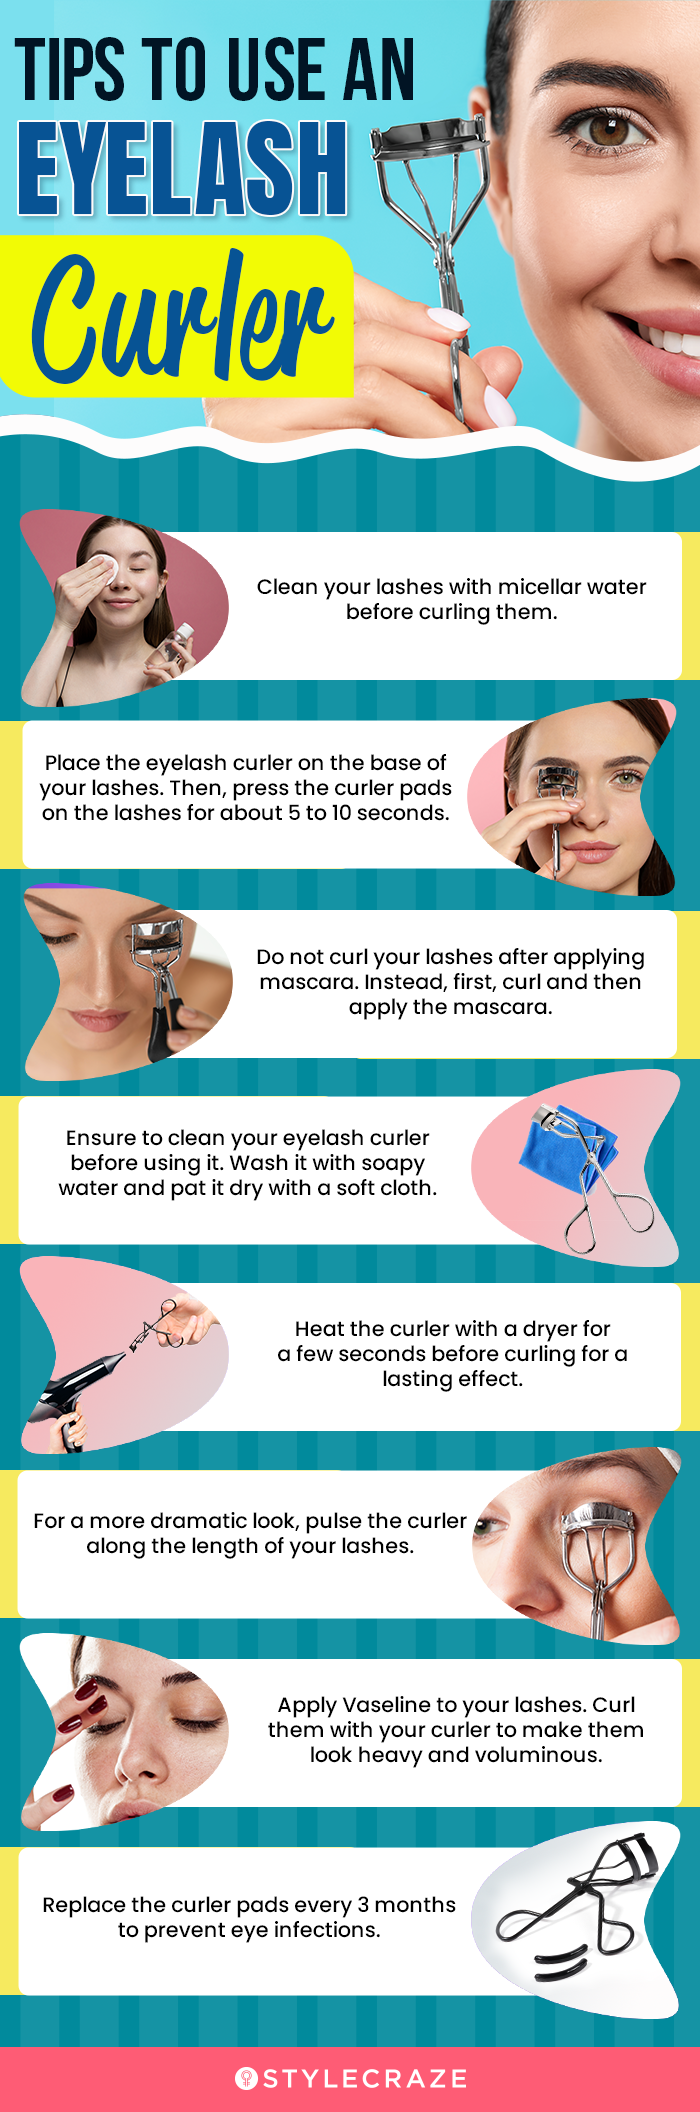 Tips To Use An Eyelash Curler (infographic)